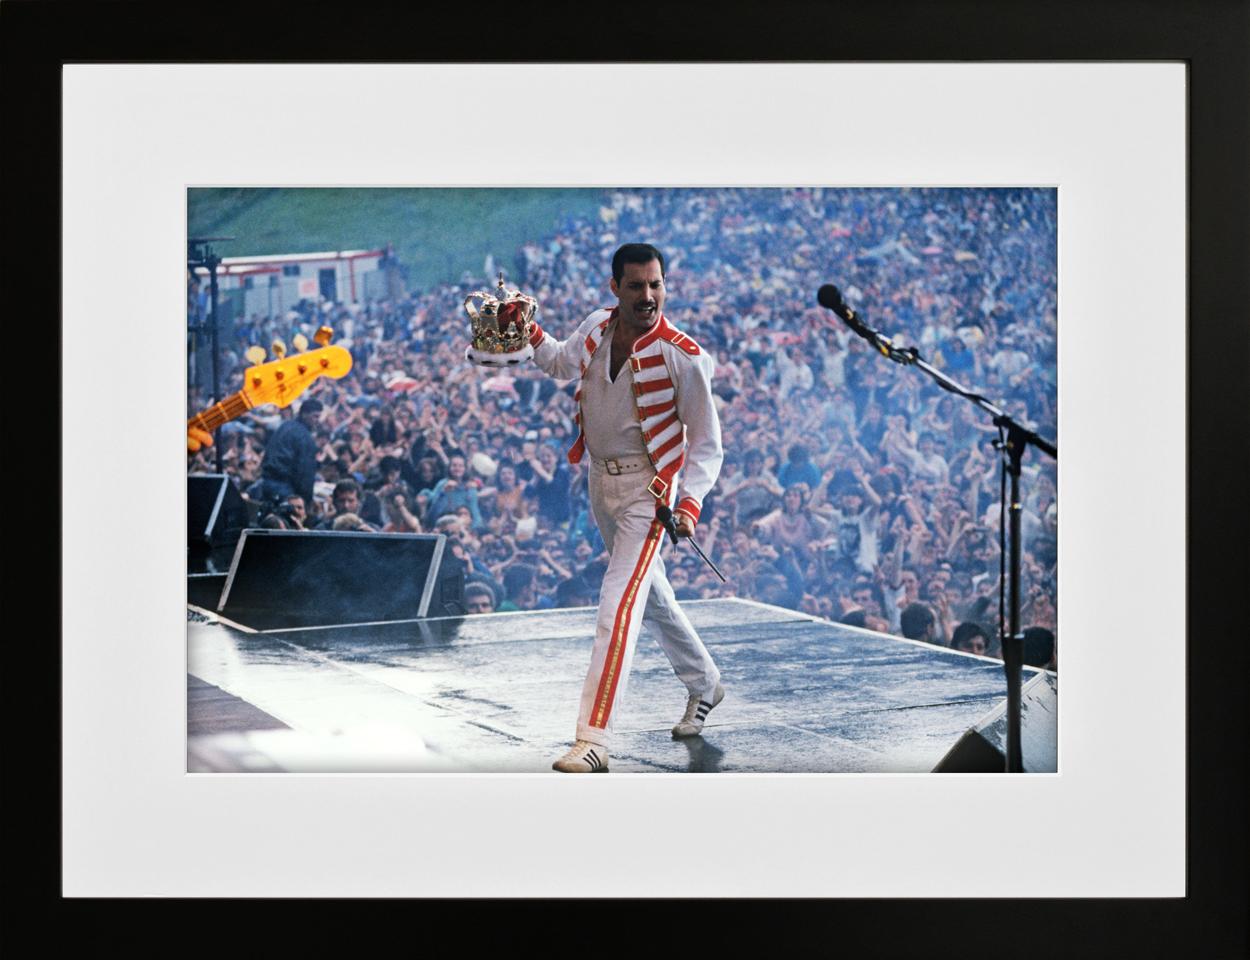 Freddie Mercury, Queen in Concert, Magic Tour, Slane Castle, County Meath, 1986 - Photograph by Richard Young